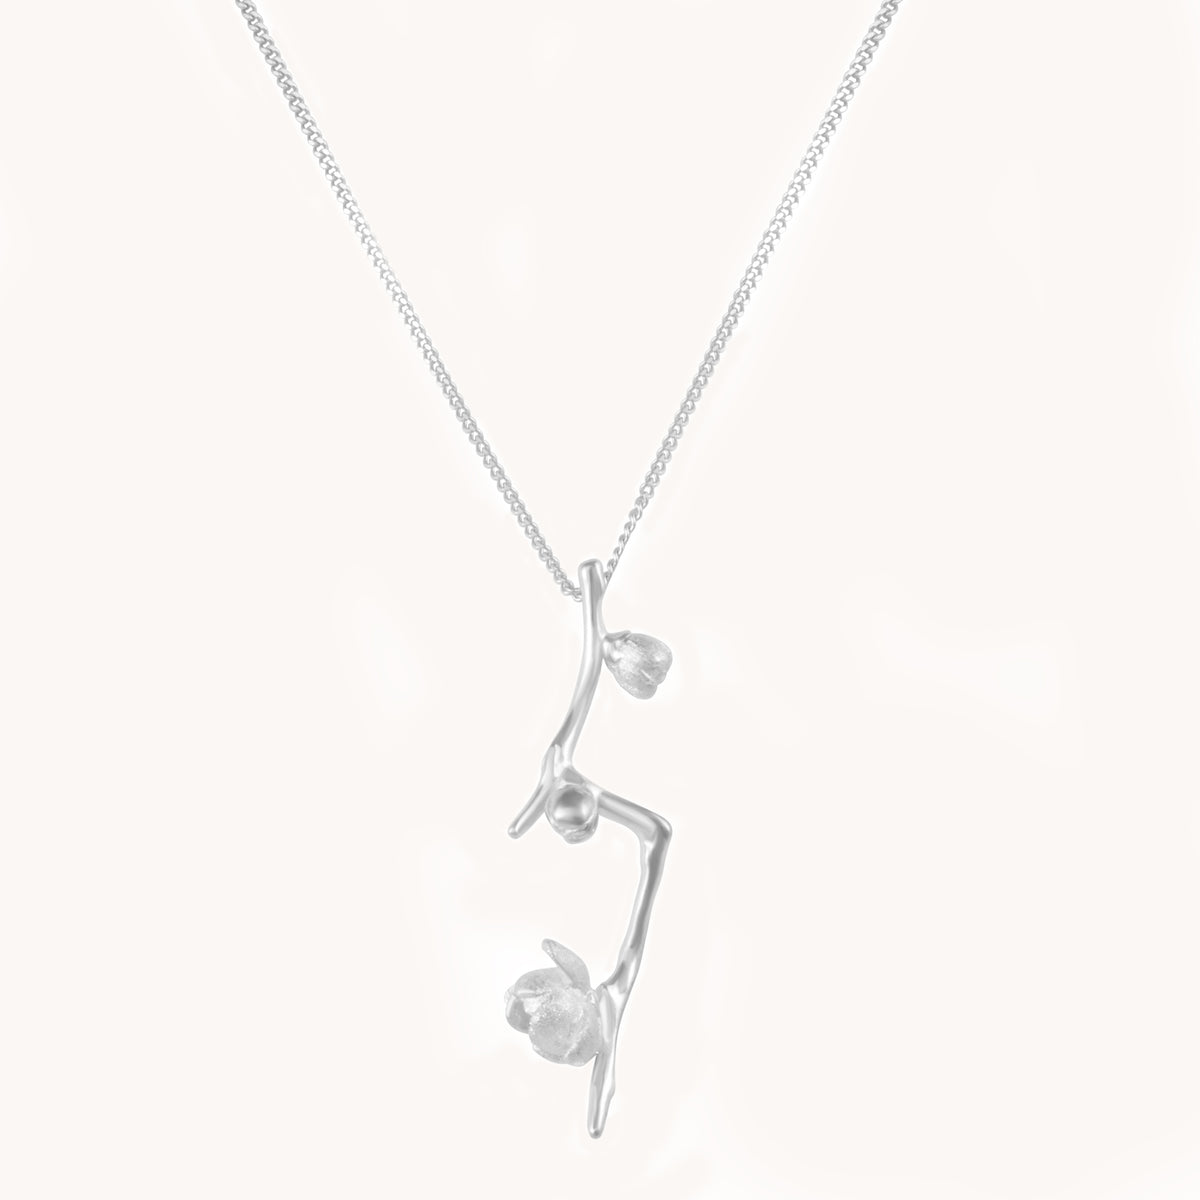 Plum Blossom Silver Pendant With Chain